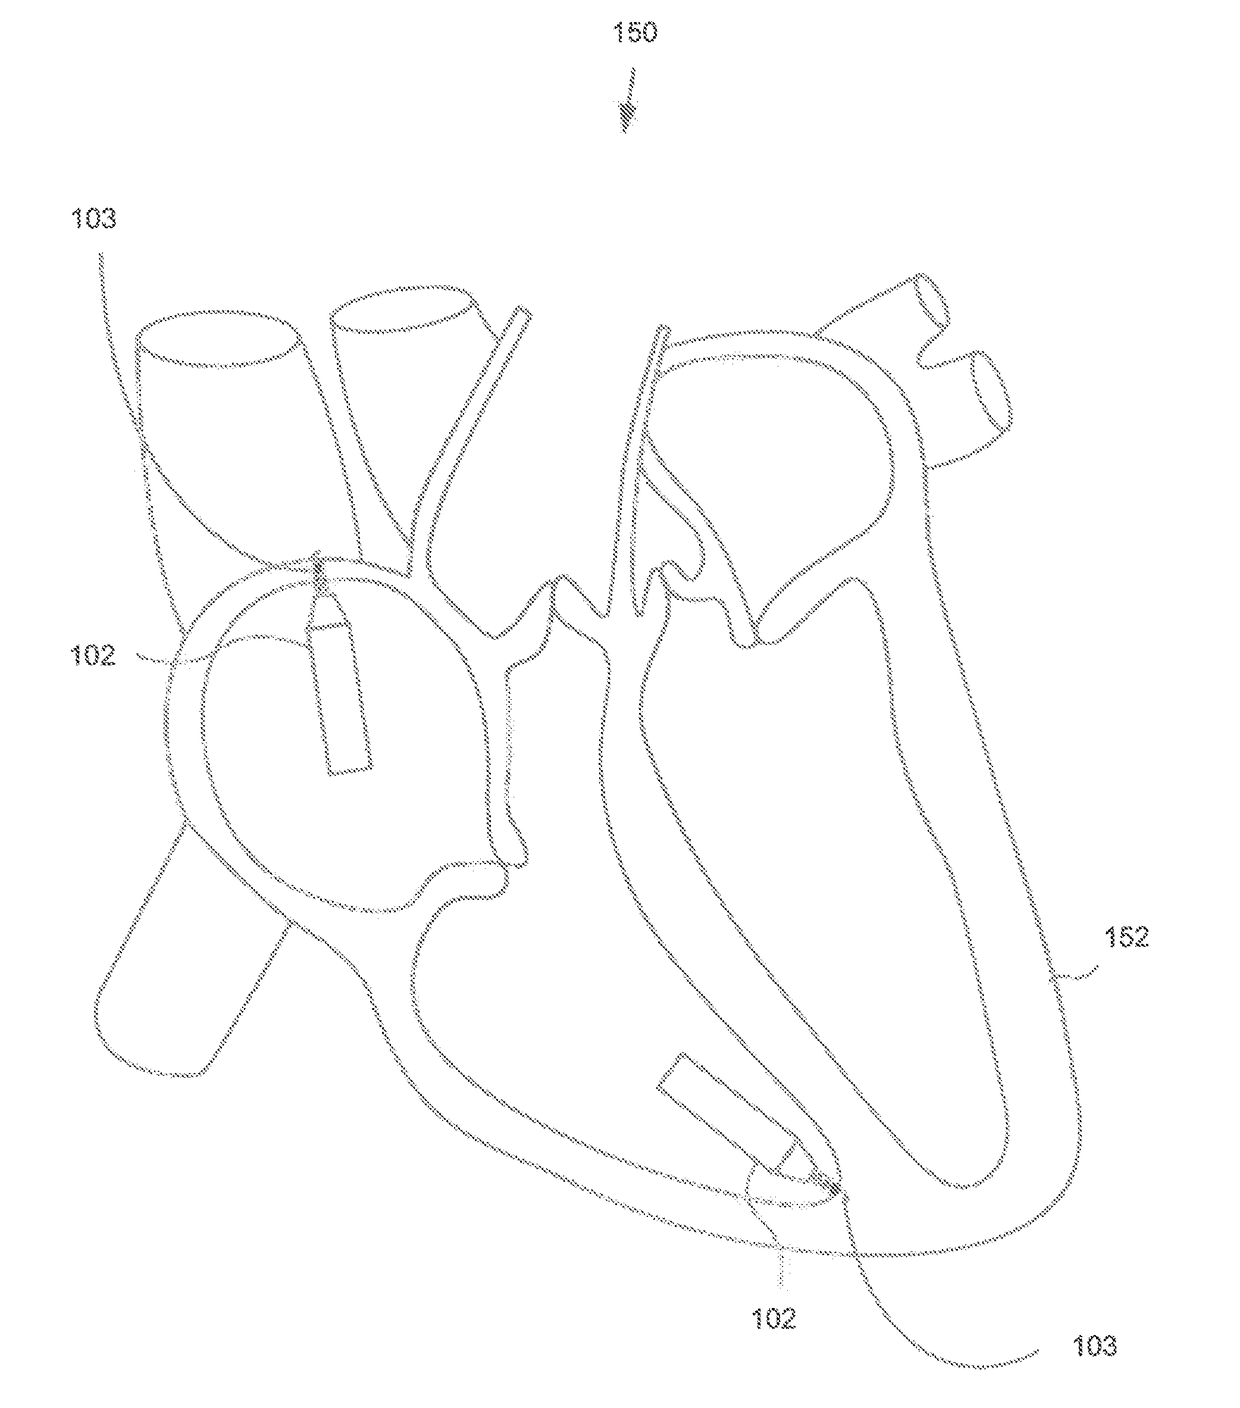 Catheter-based delivery system for delivering a leadless pacemaker and employing a locking hub